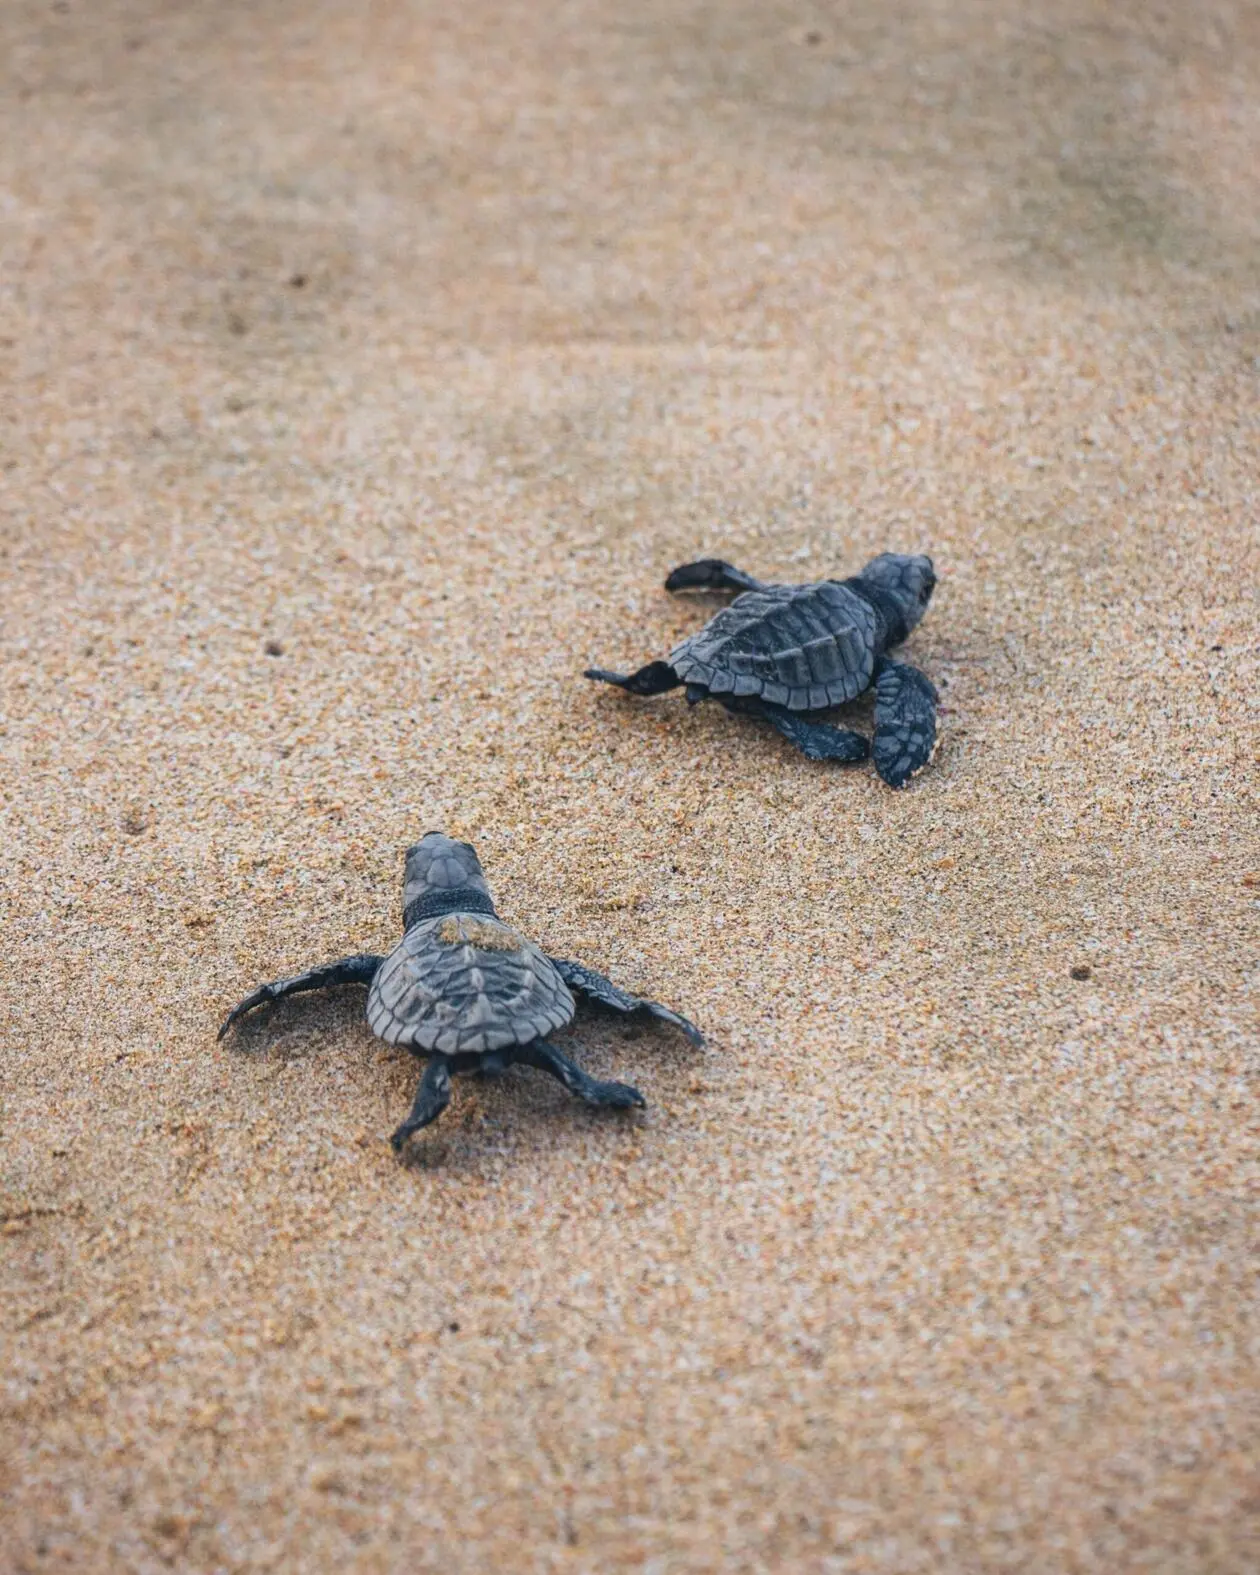 Picture of the turtles on the beach